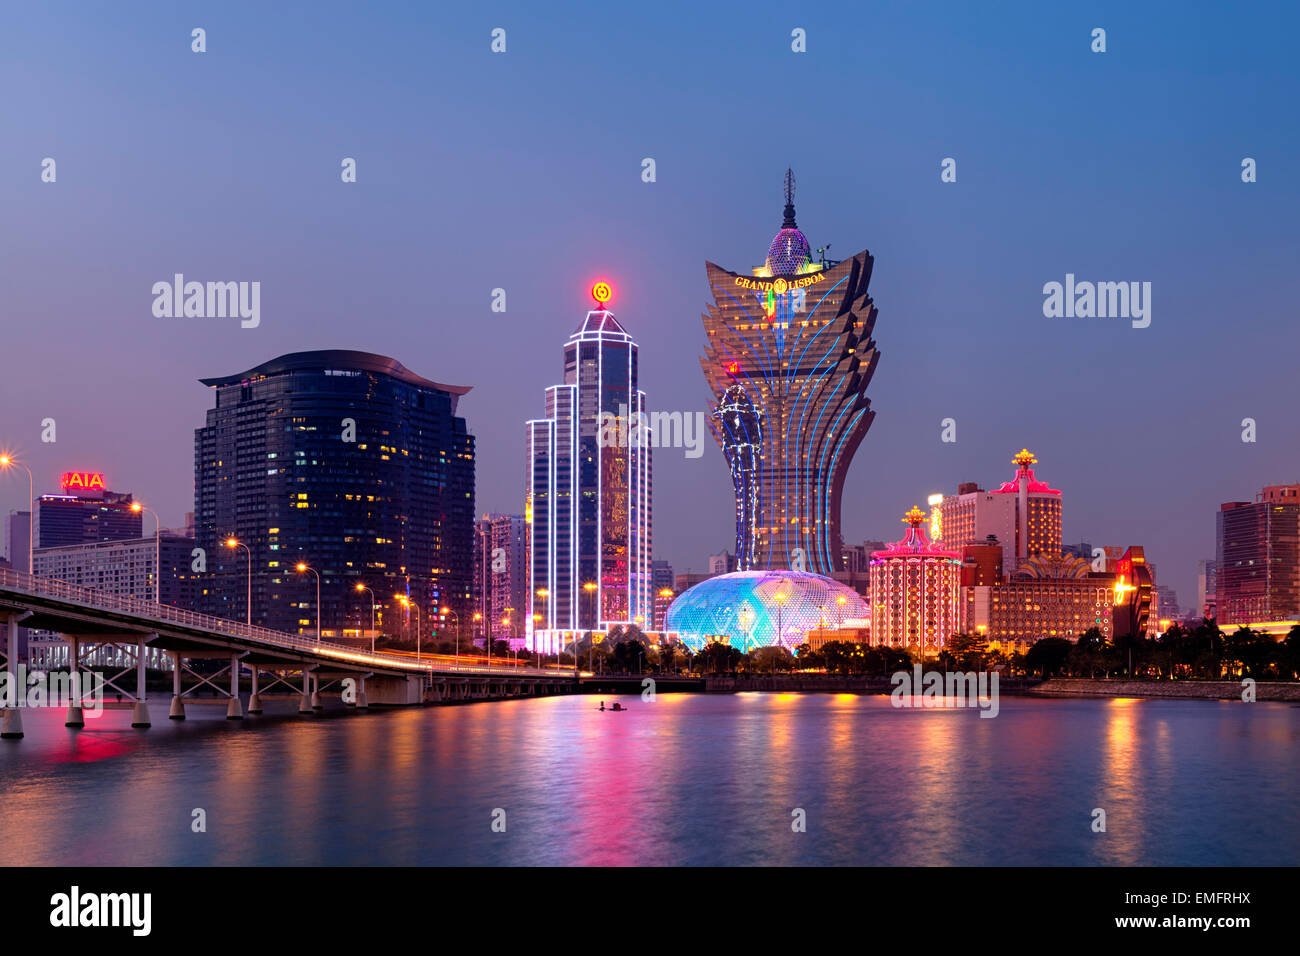 Macao, Macau S.A.R - November 16,2014: Night Macao Skyline, including Casinos such as, The Grand Lisboa and  Wynn. Gambling in M Stock Photo